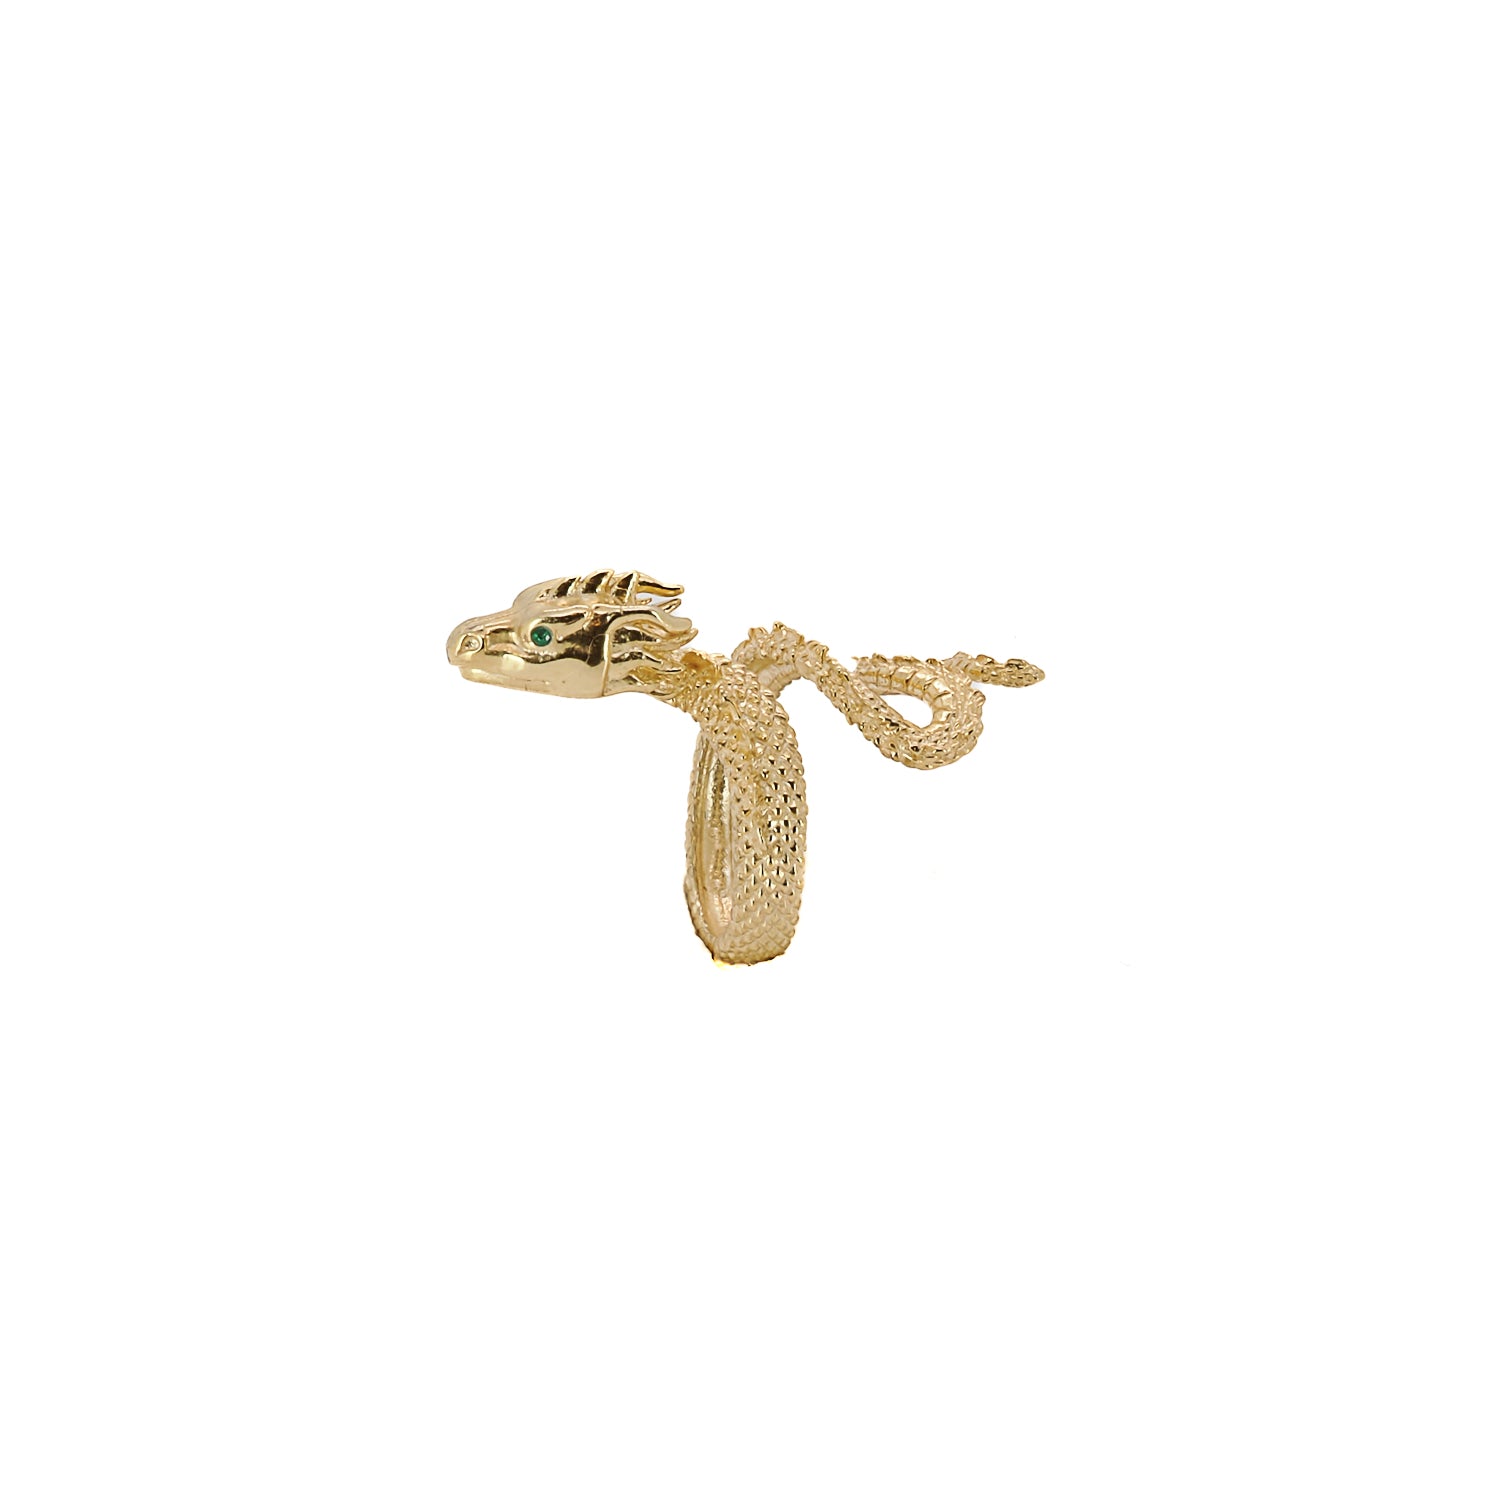 Handcrafted Gold Vermeil Snake Ring - Symbol of Rebirth